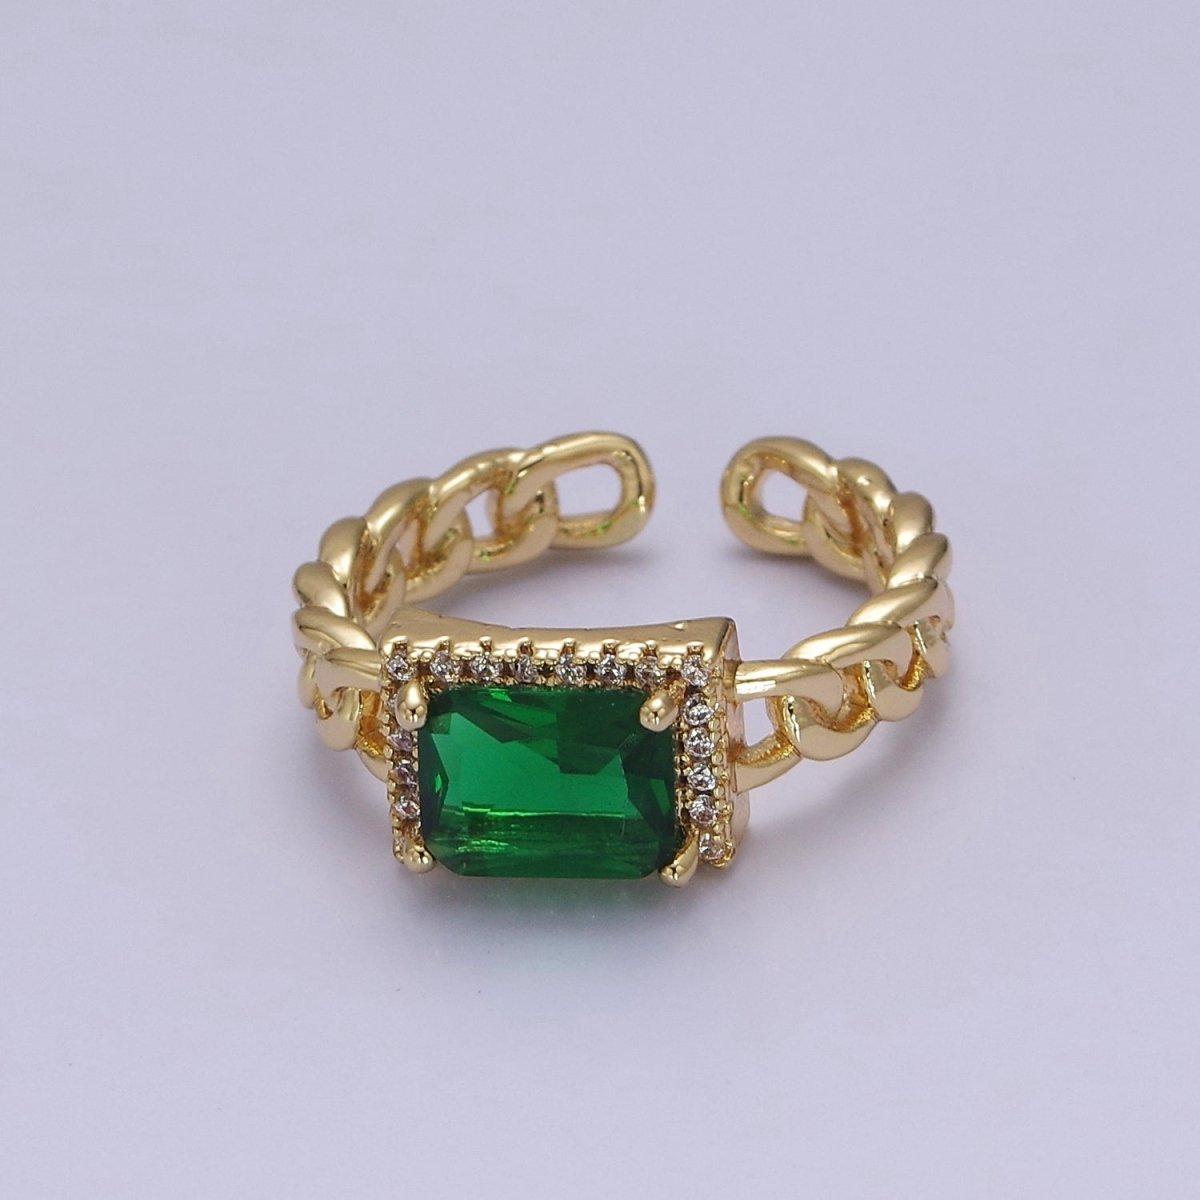 Chunky Emerald Green Cz Stone Ring in 18k Gold Filled Curb Chain Link Band Open Adjustable O-2080 - DLUXCA